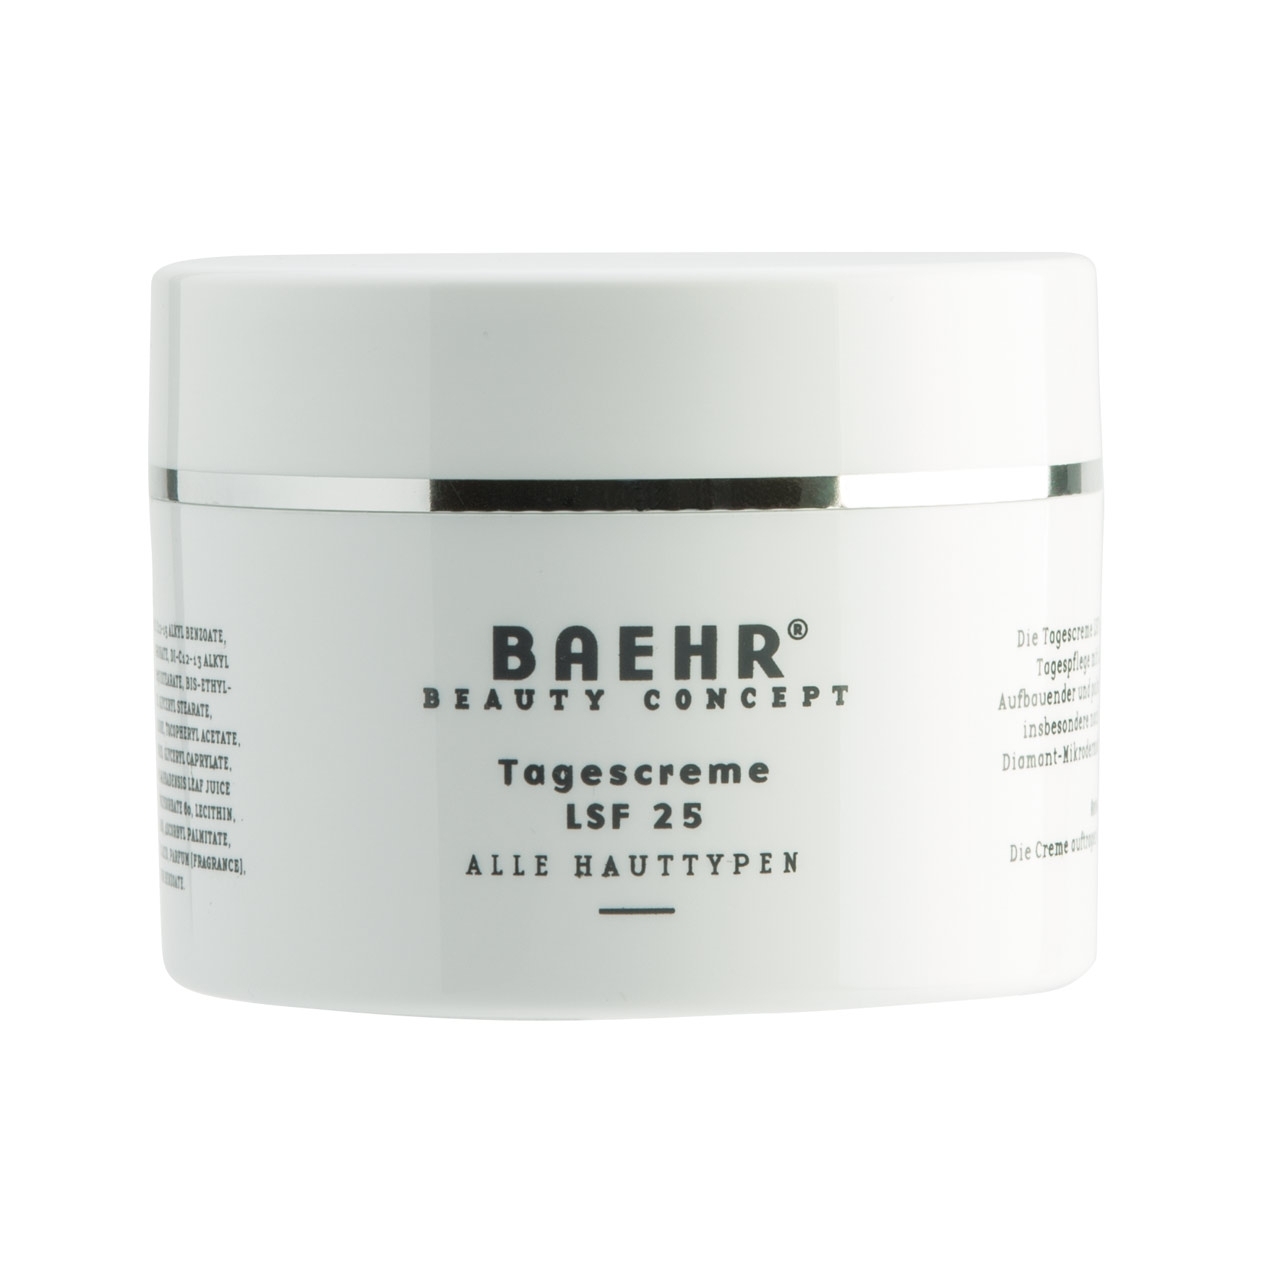 BAEHR BEAUTY CONCEPT - Tagescreme LSF 25, 250 ml